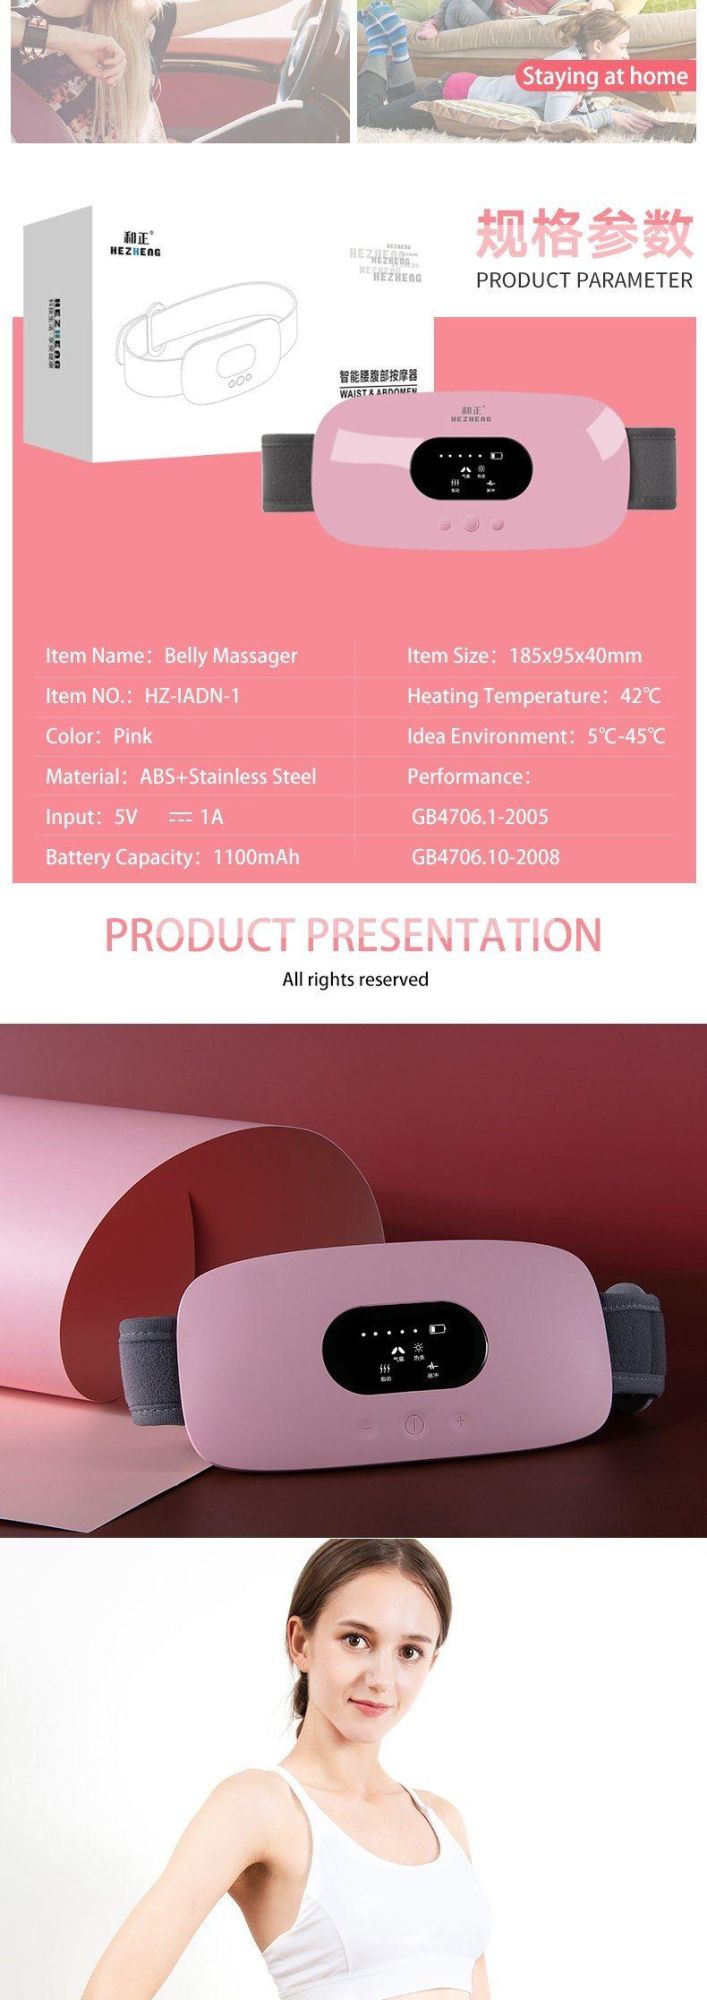 Hezheng Air Compression with Red Light for Women Waist Use Wireless Design Abdomen Massager with Heat Function